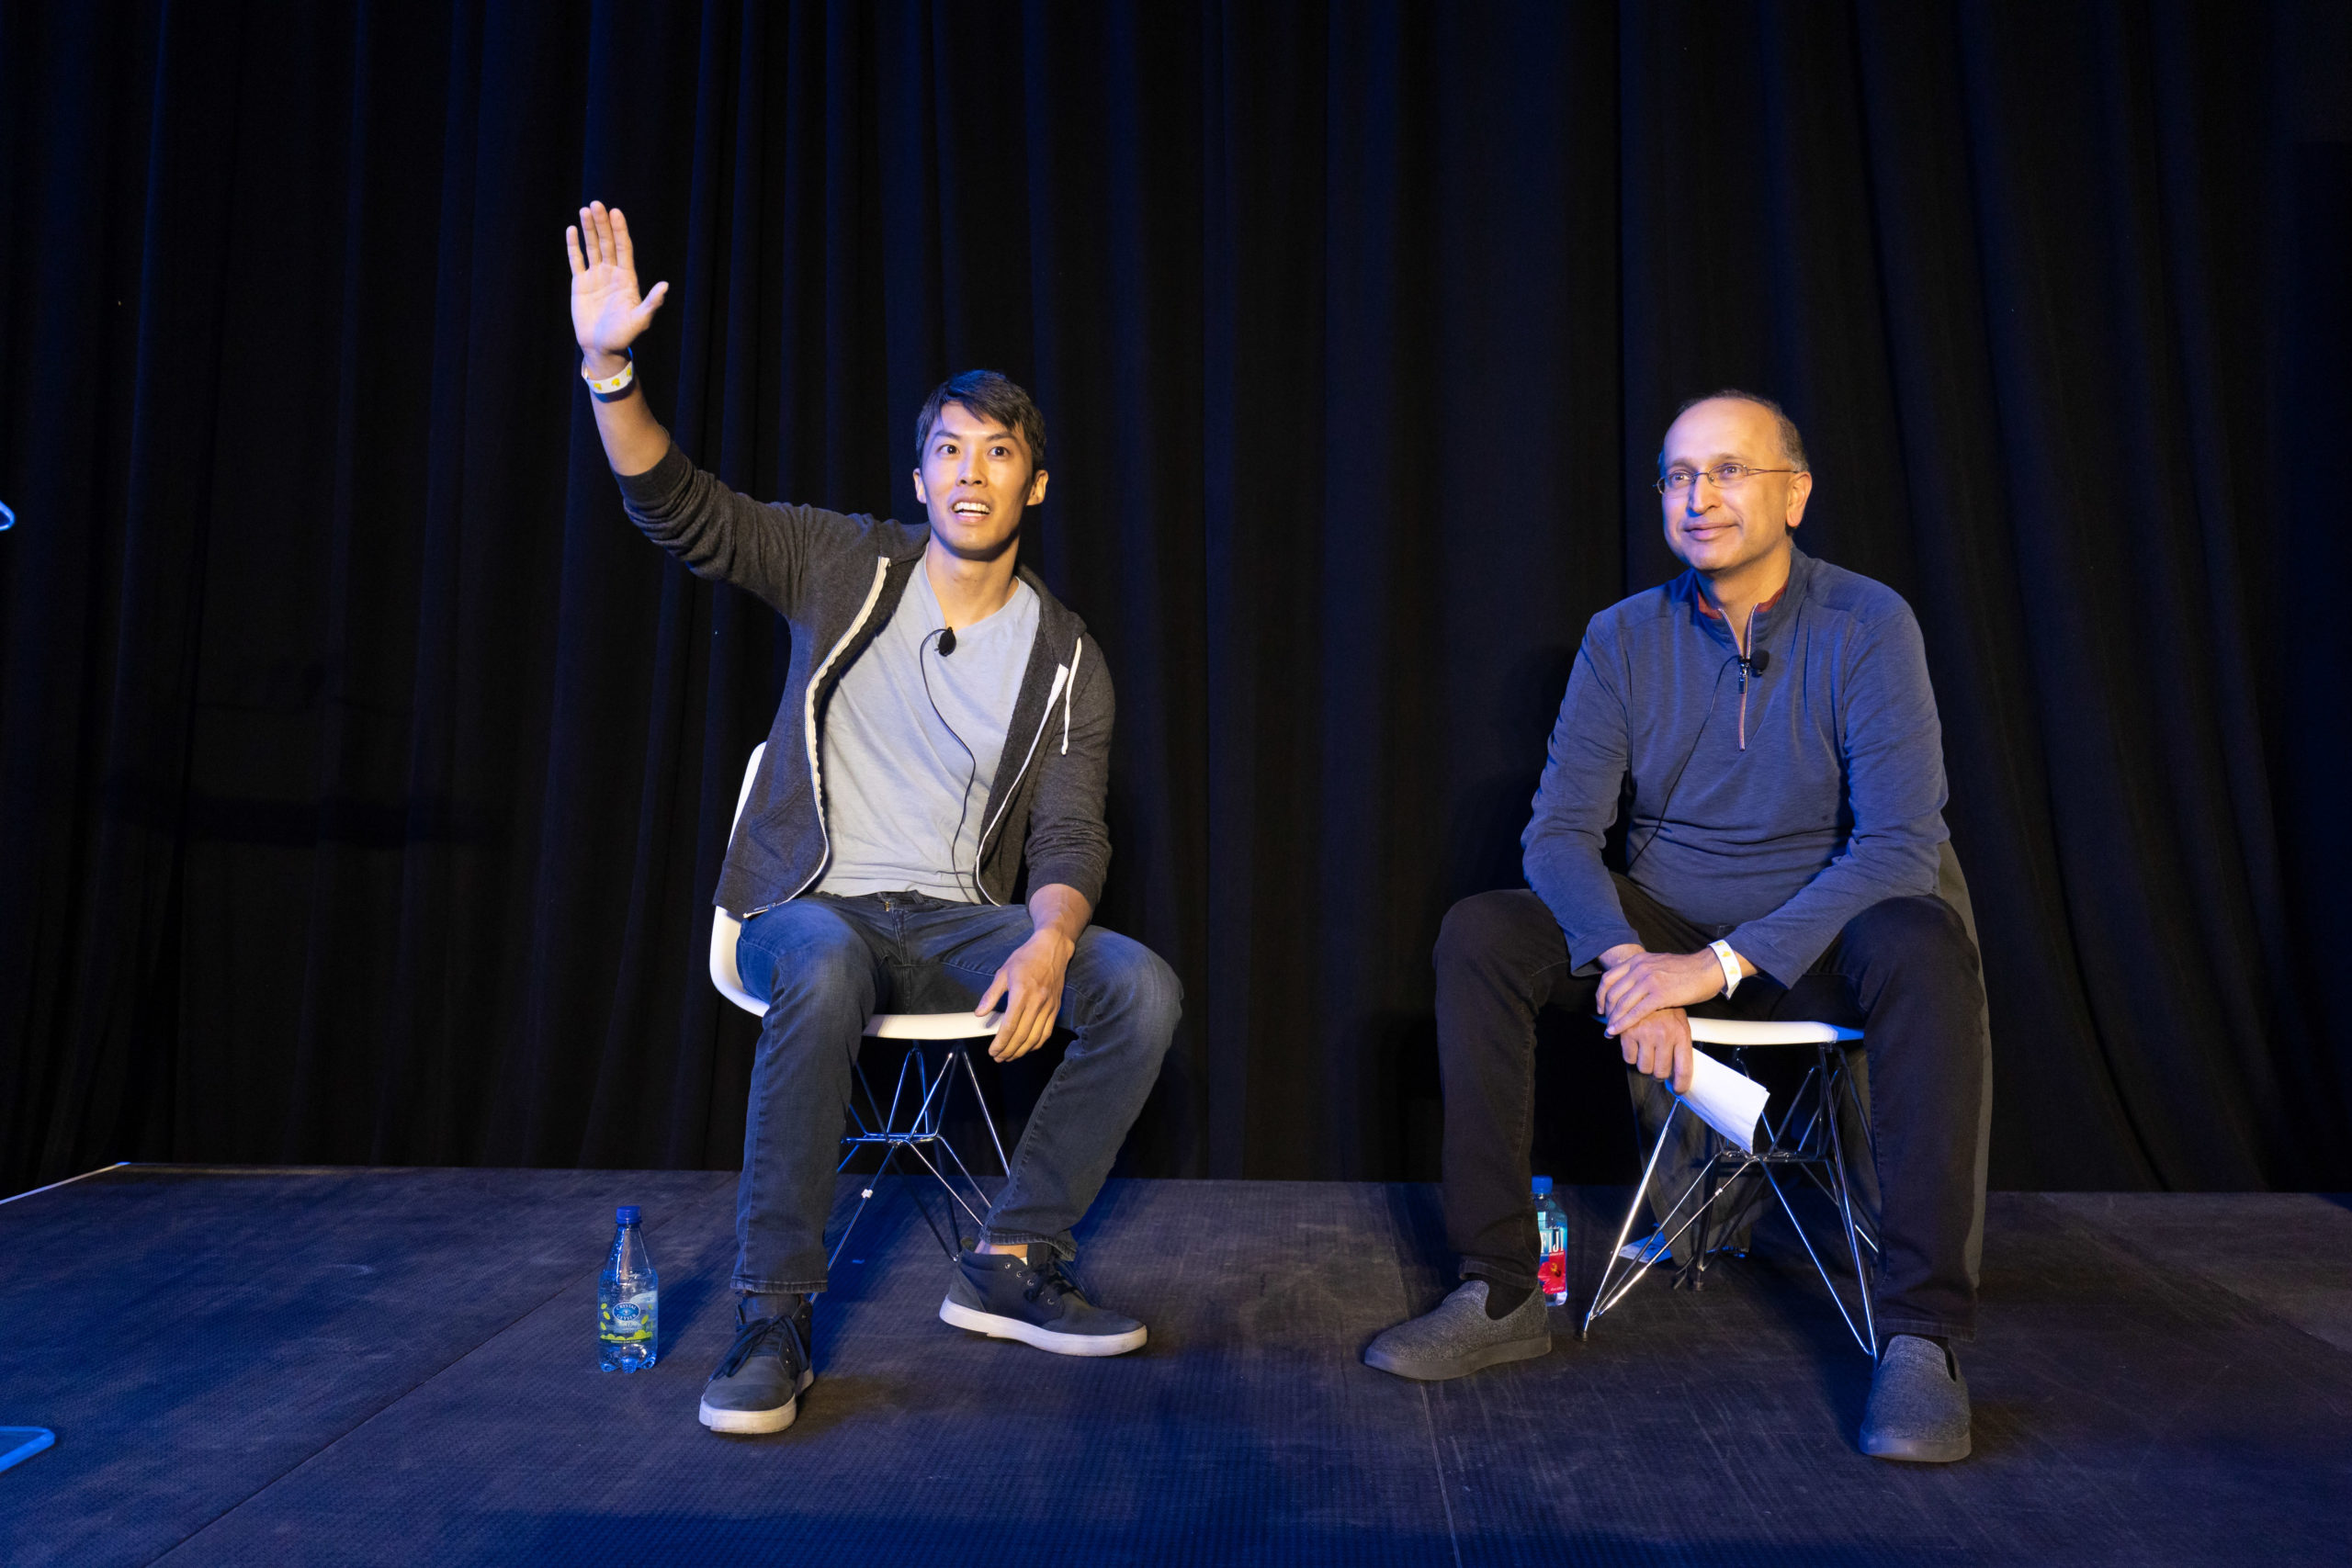 Joe Lau and Navin Chaddha on stage at TechCrunch Early Stage